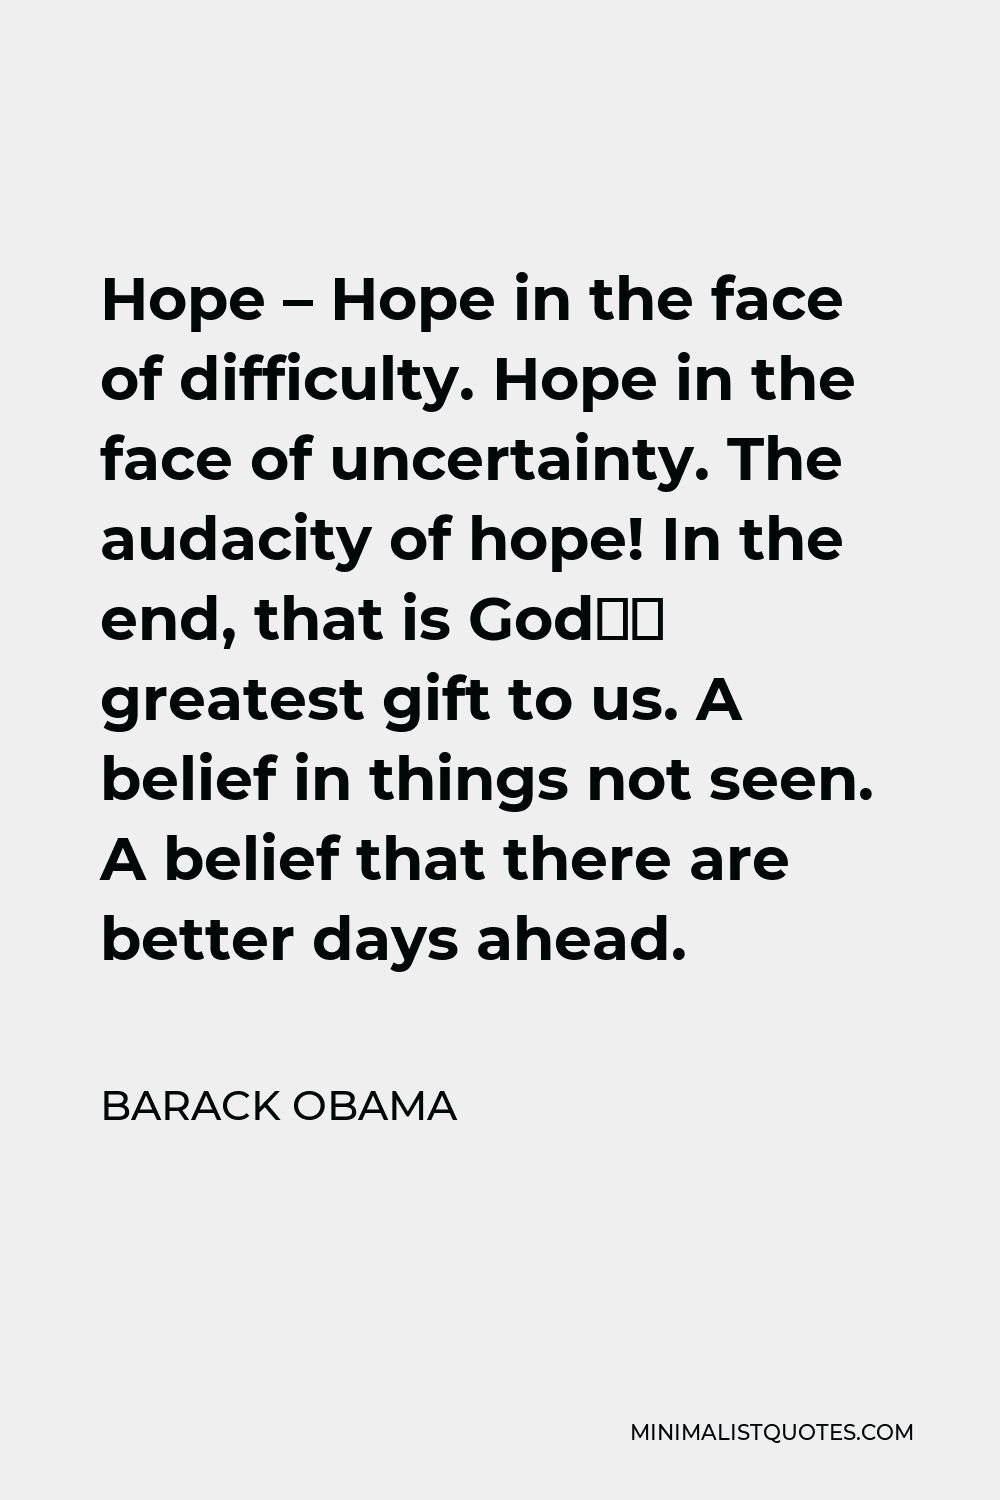 Barack Obama Quote - Hope – Hope in the face of difficulty. Hope in the face of uncertainty. The audacity of hope! In the end, that is God’s greatest gift to us. A belief in things not seen. A belief that there are better days ahead.